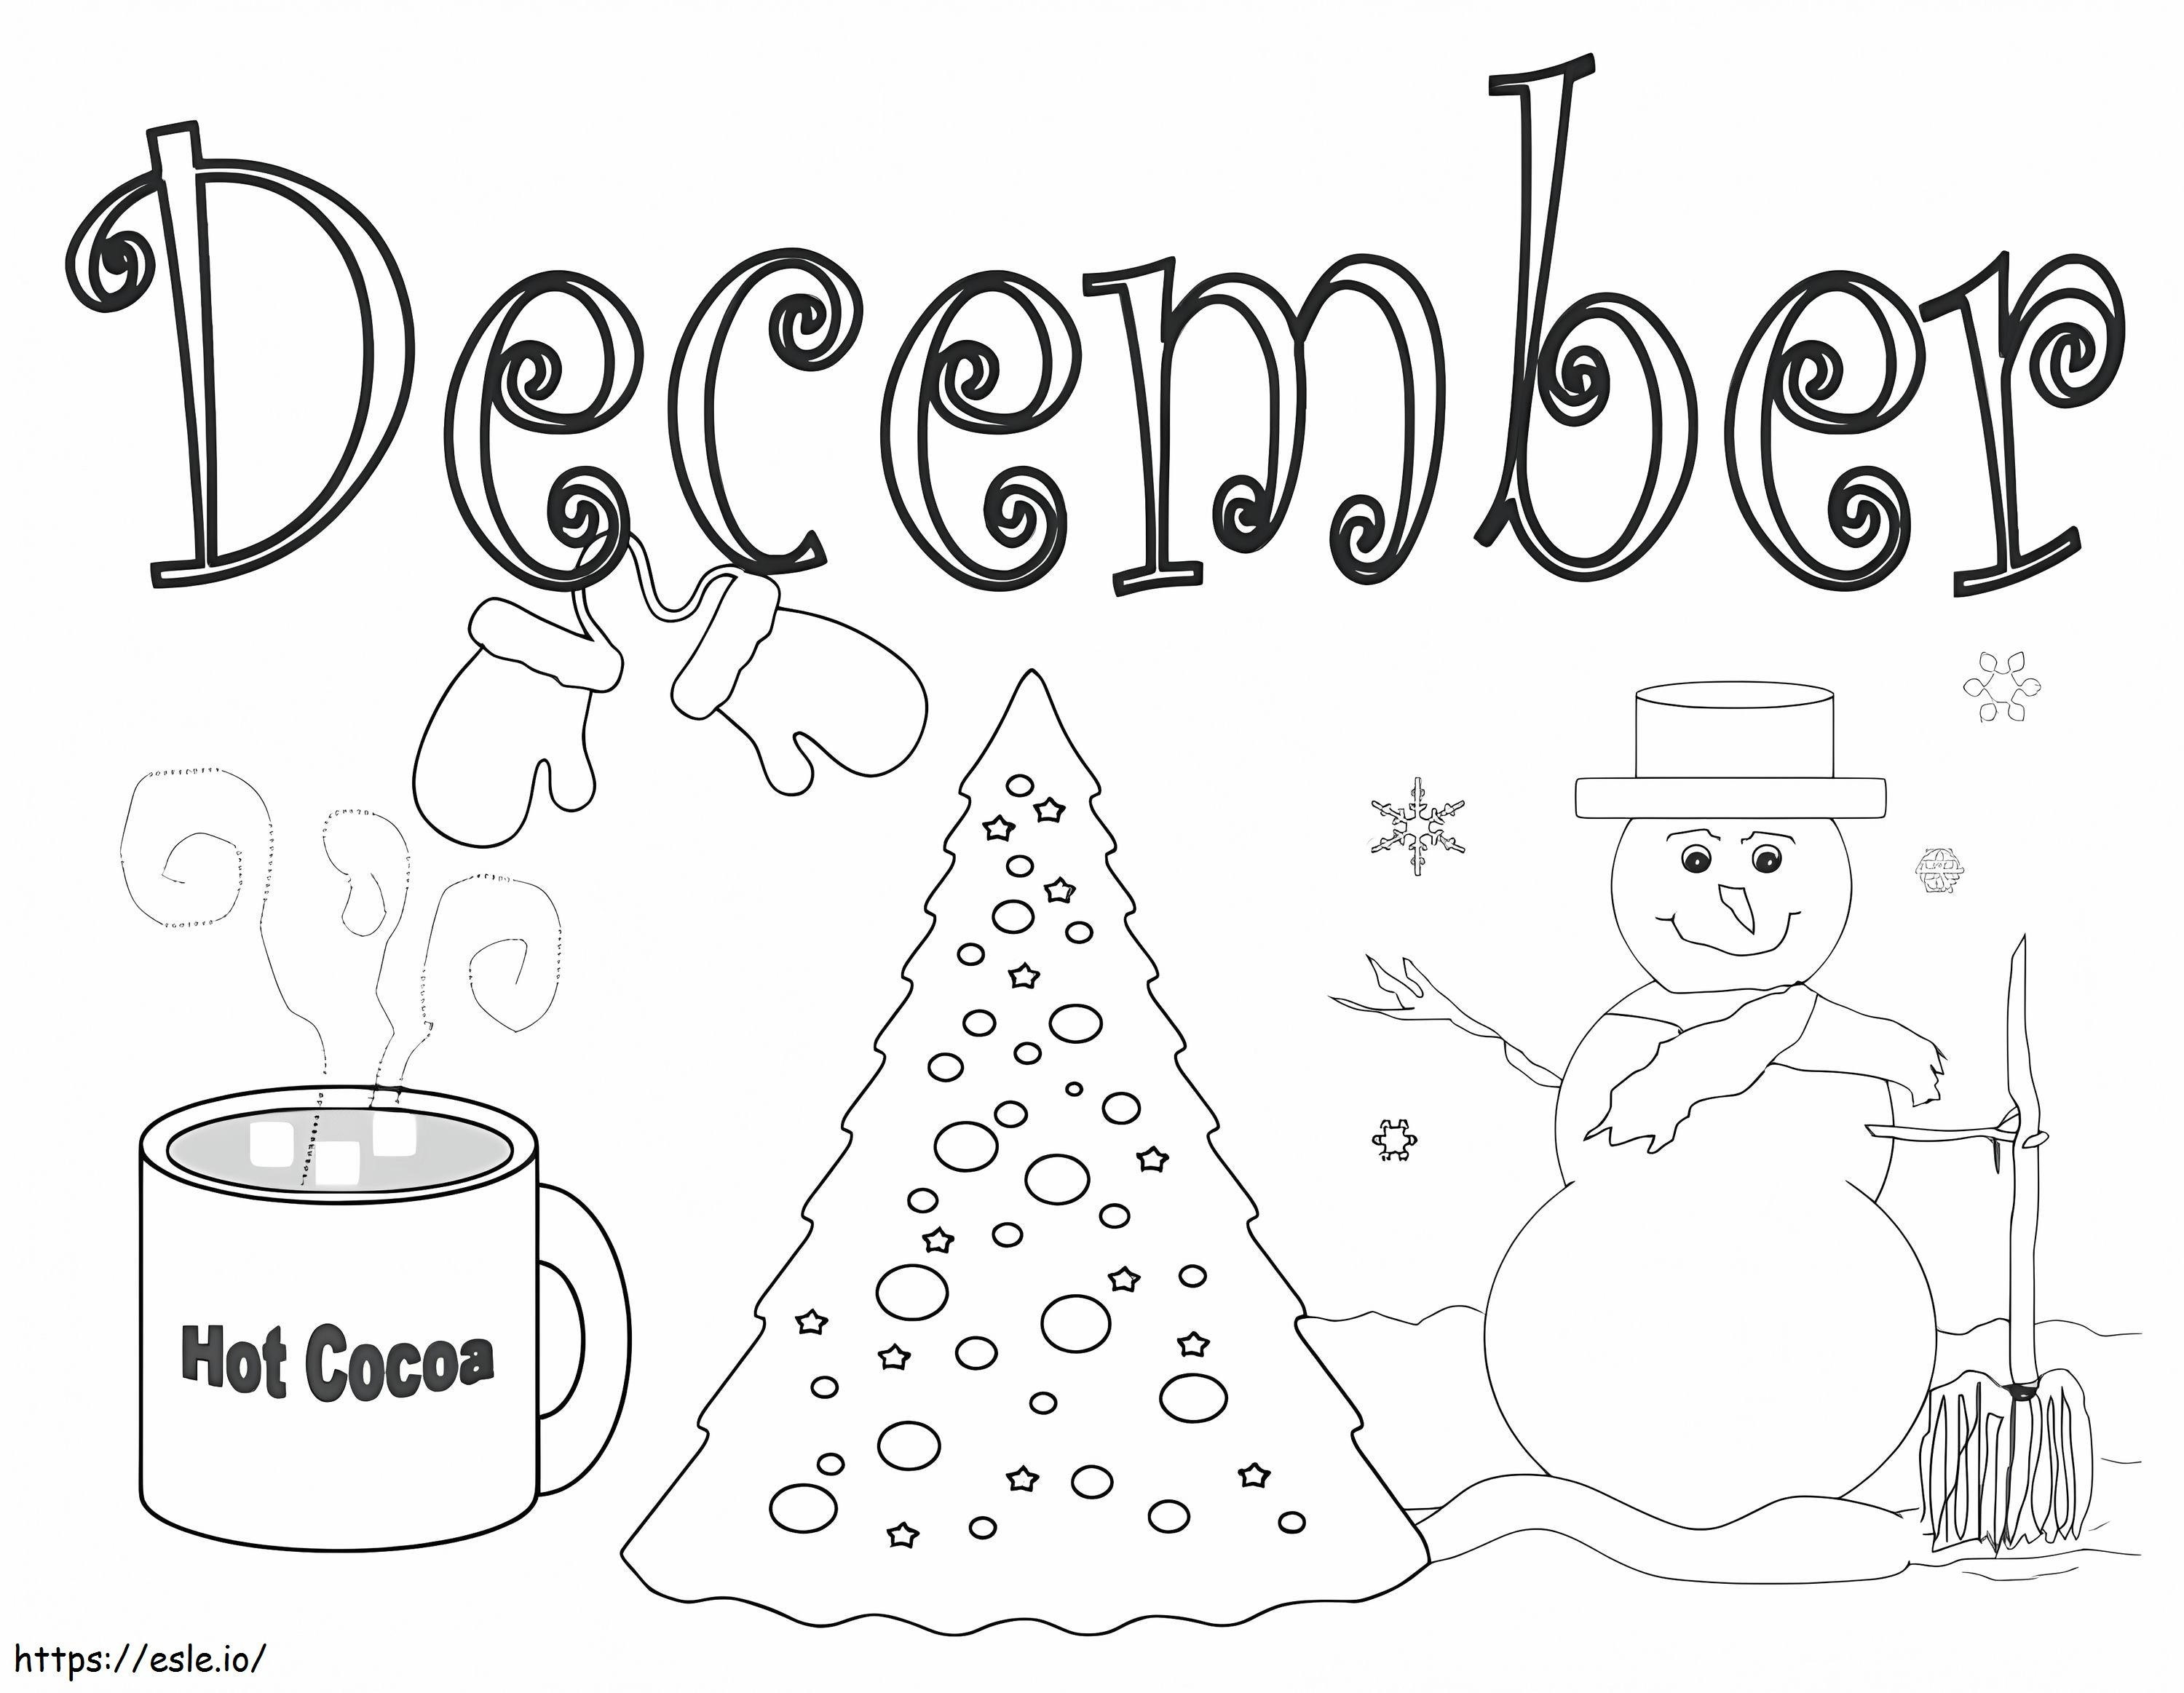 December Month coloring page